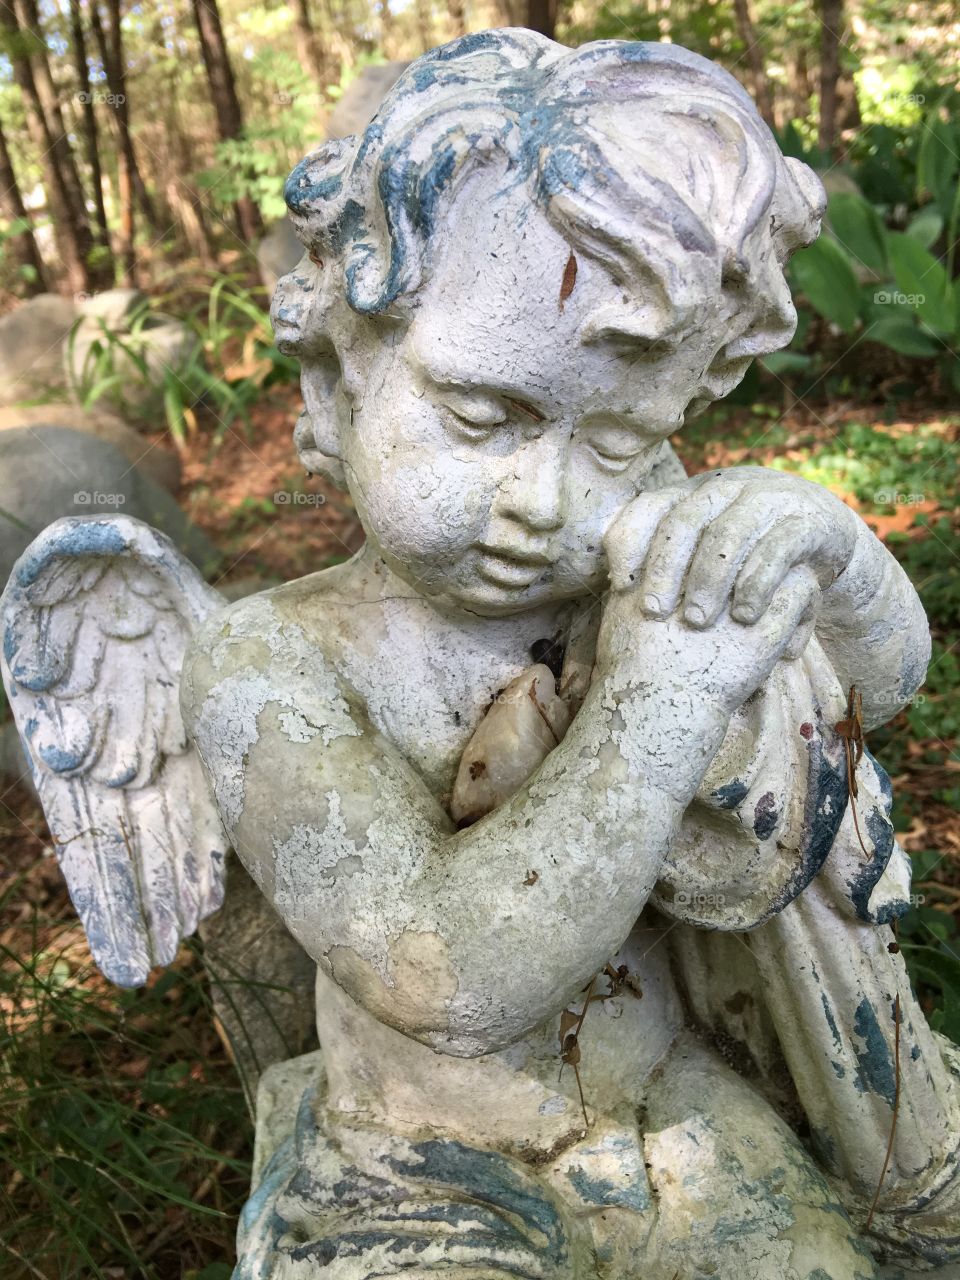 Angel sitting, aging, watching over place near woods.